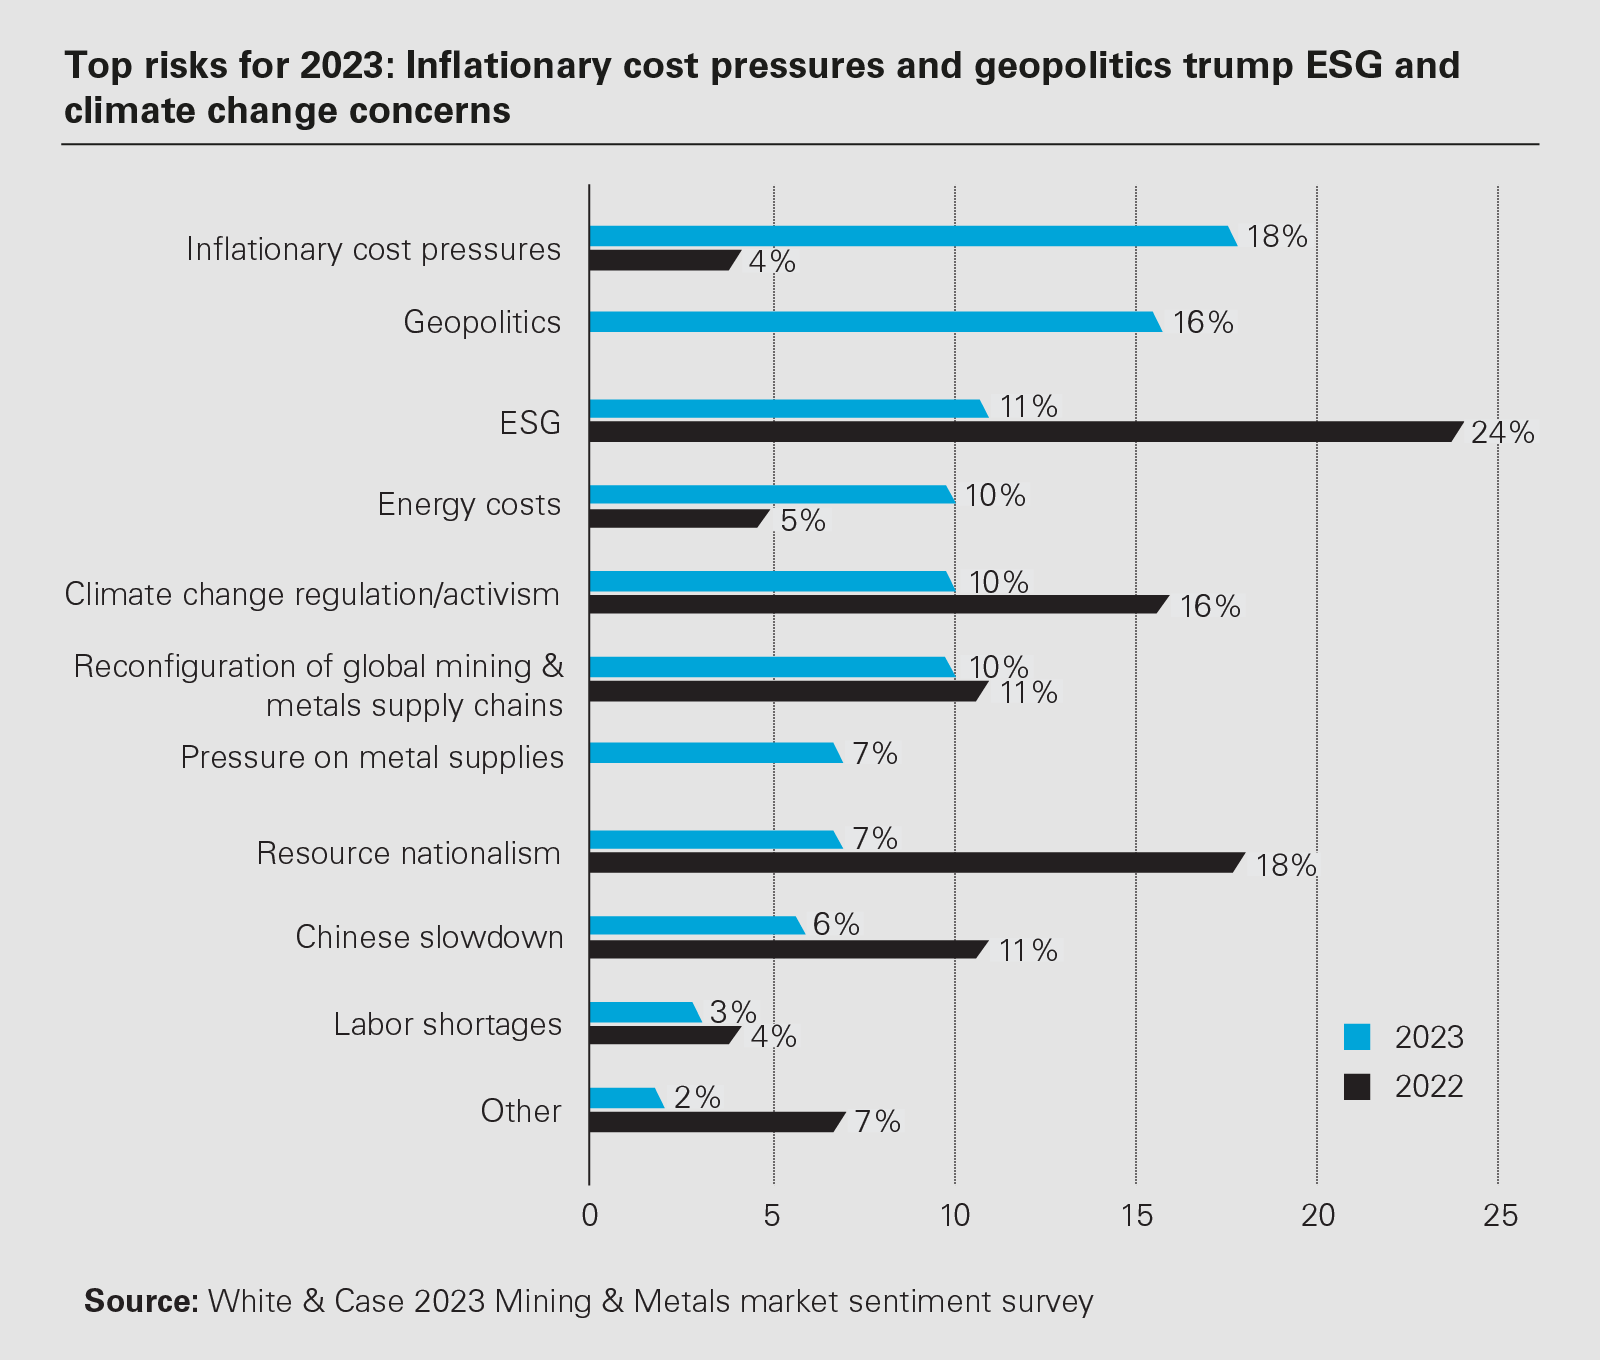 Top risks for 2023: Inflationary cost pressures and geopolitics trump ESG and climate change concerns